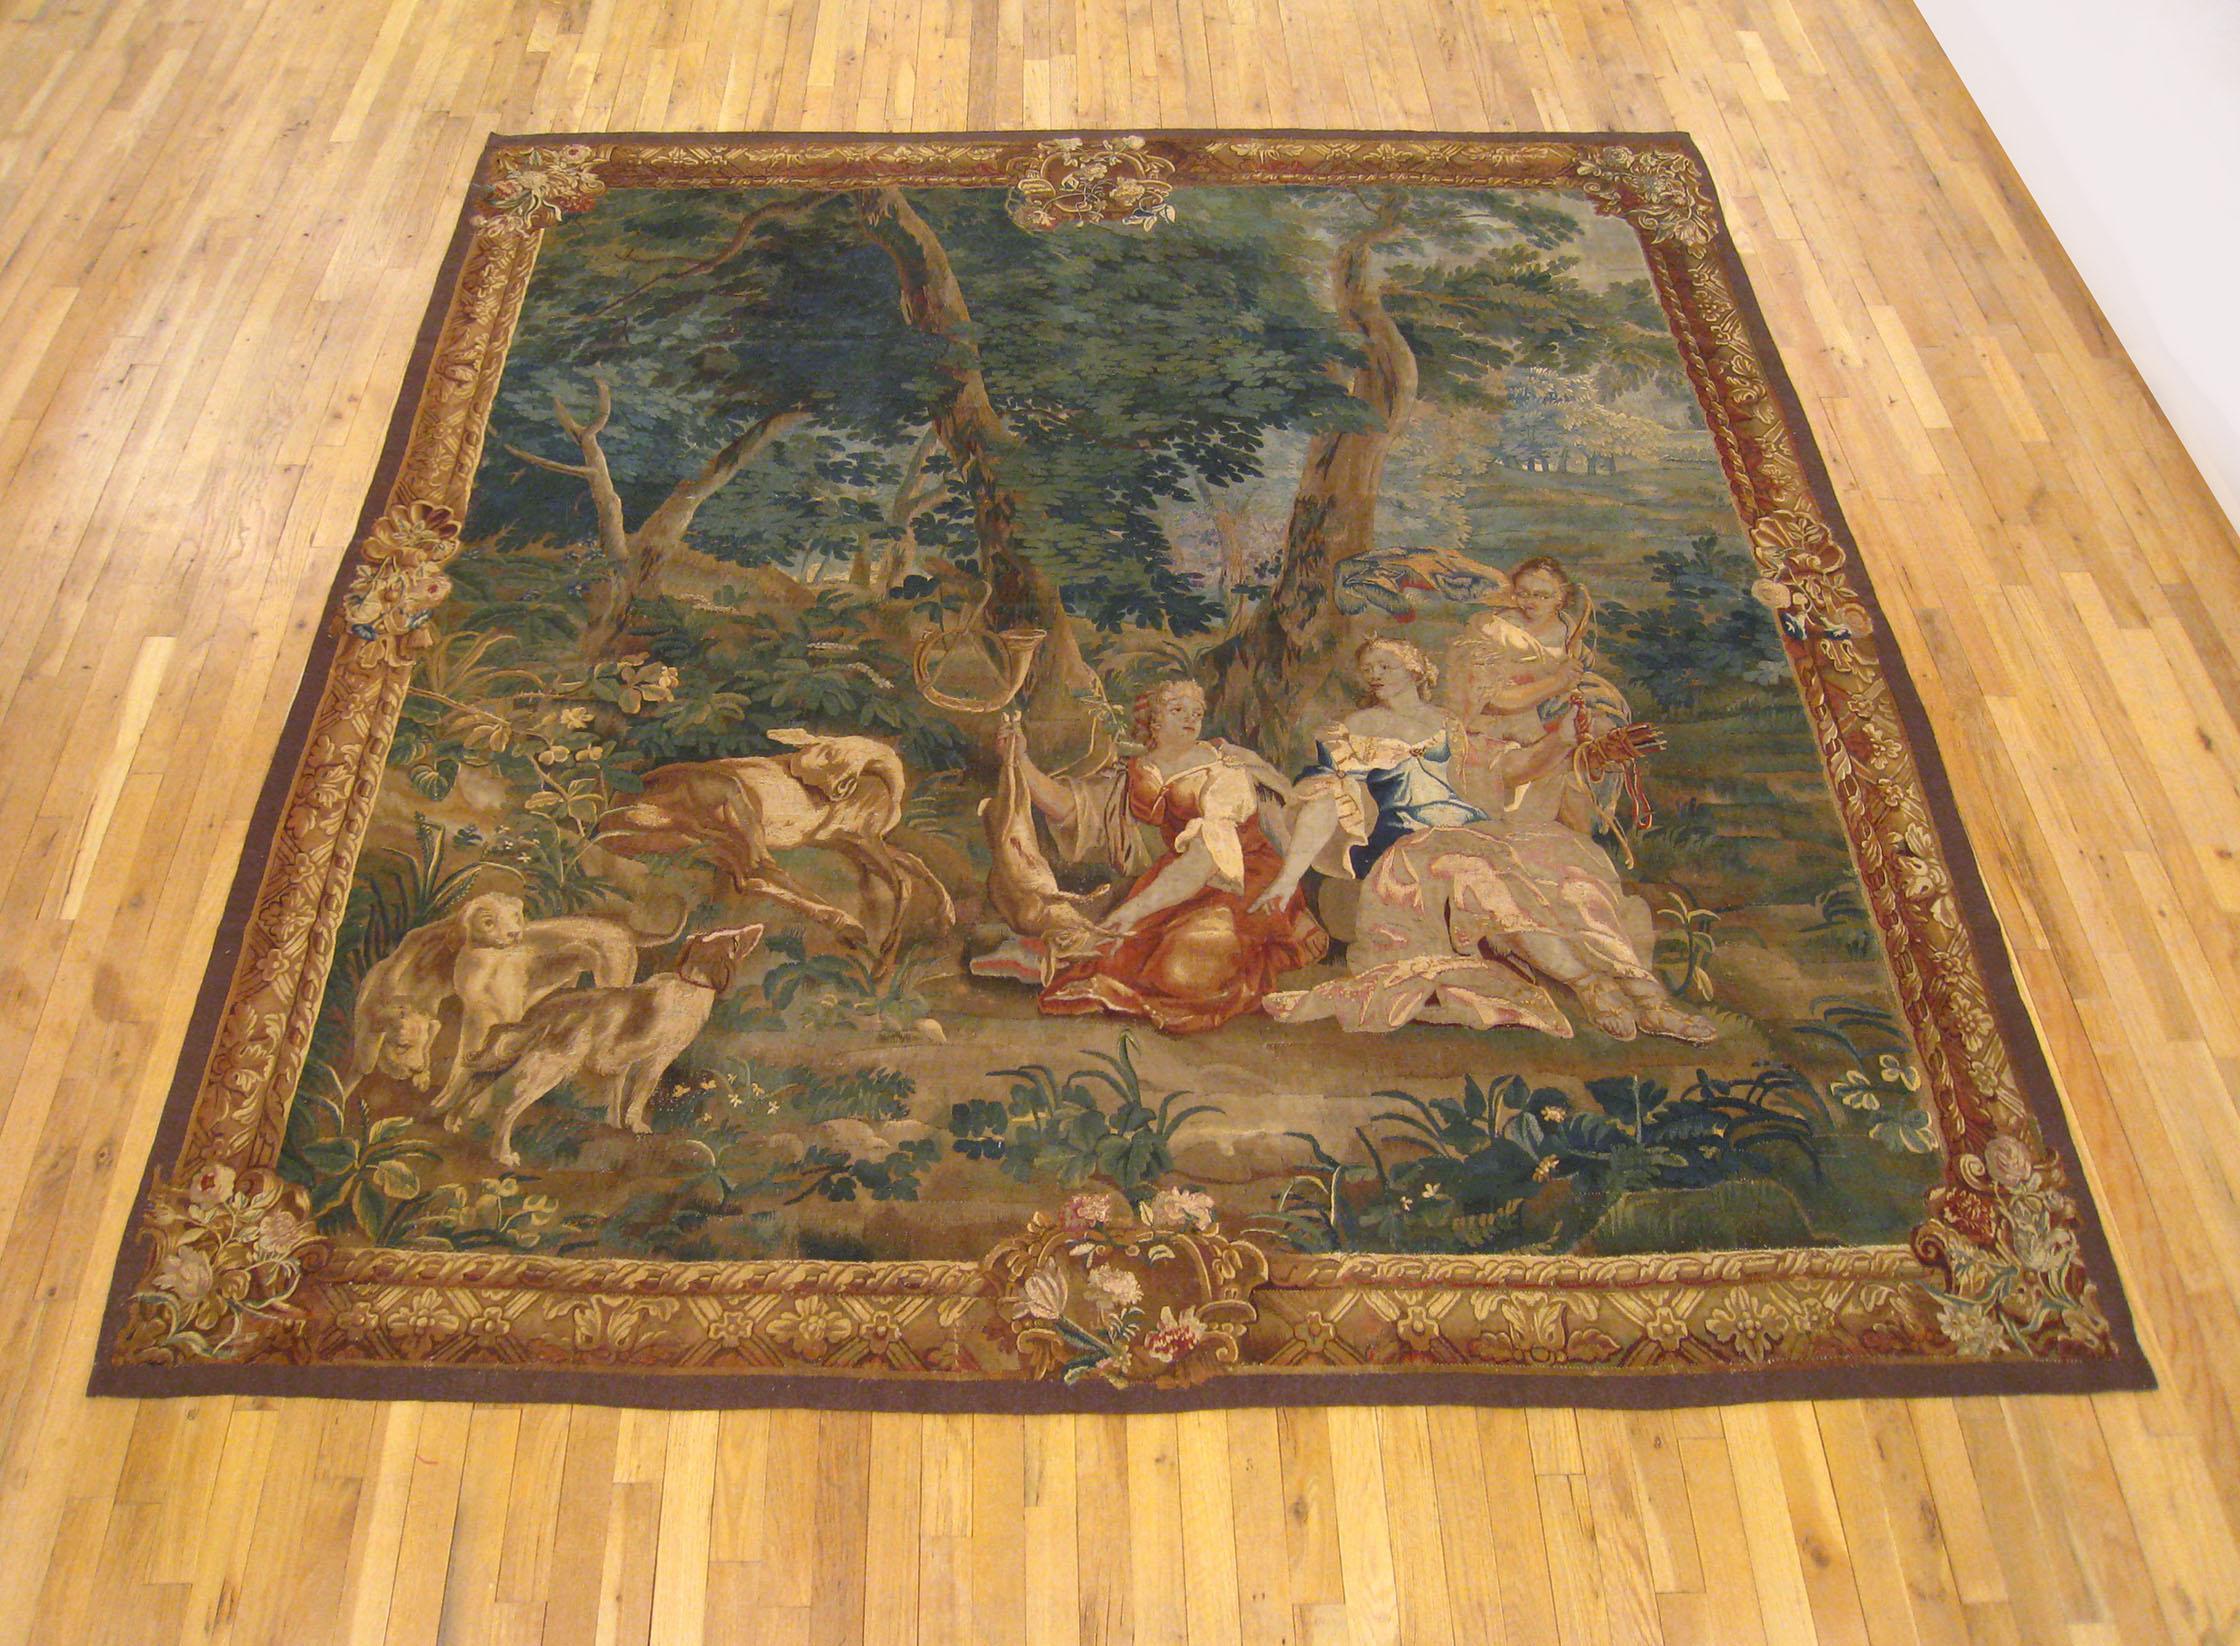 An 18th century Brussels mythological hunting tapestry, size 9' H x 8' W, depicting the Roman goddess of the hunt, Diana, reposing in a forest setting with her attendants, with one holding Diana's bow and arrow, and with her Horn hanging from a tree